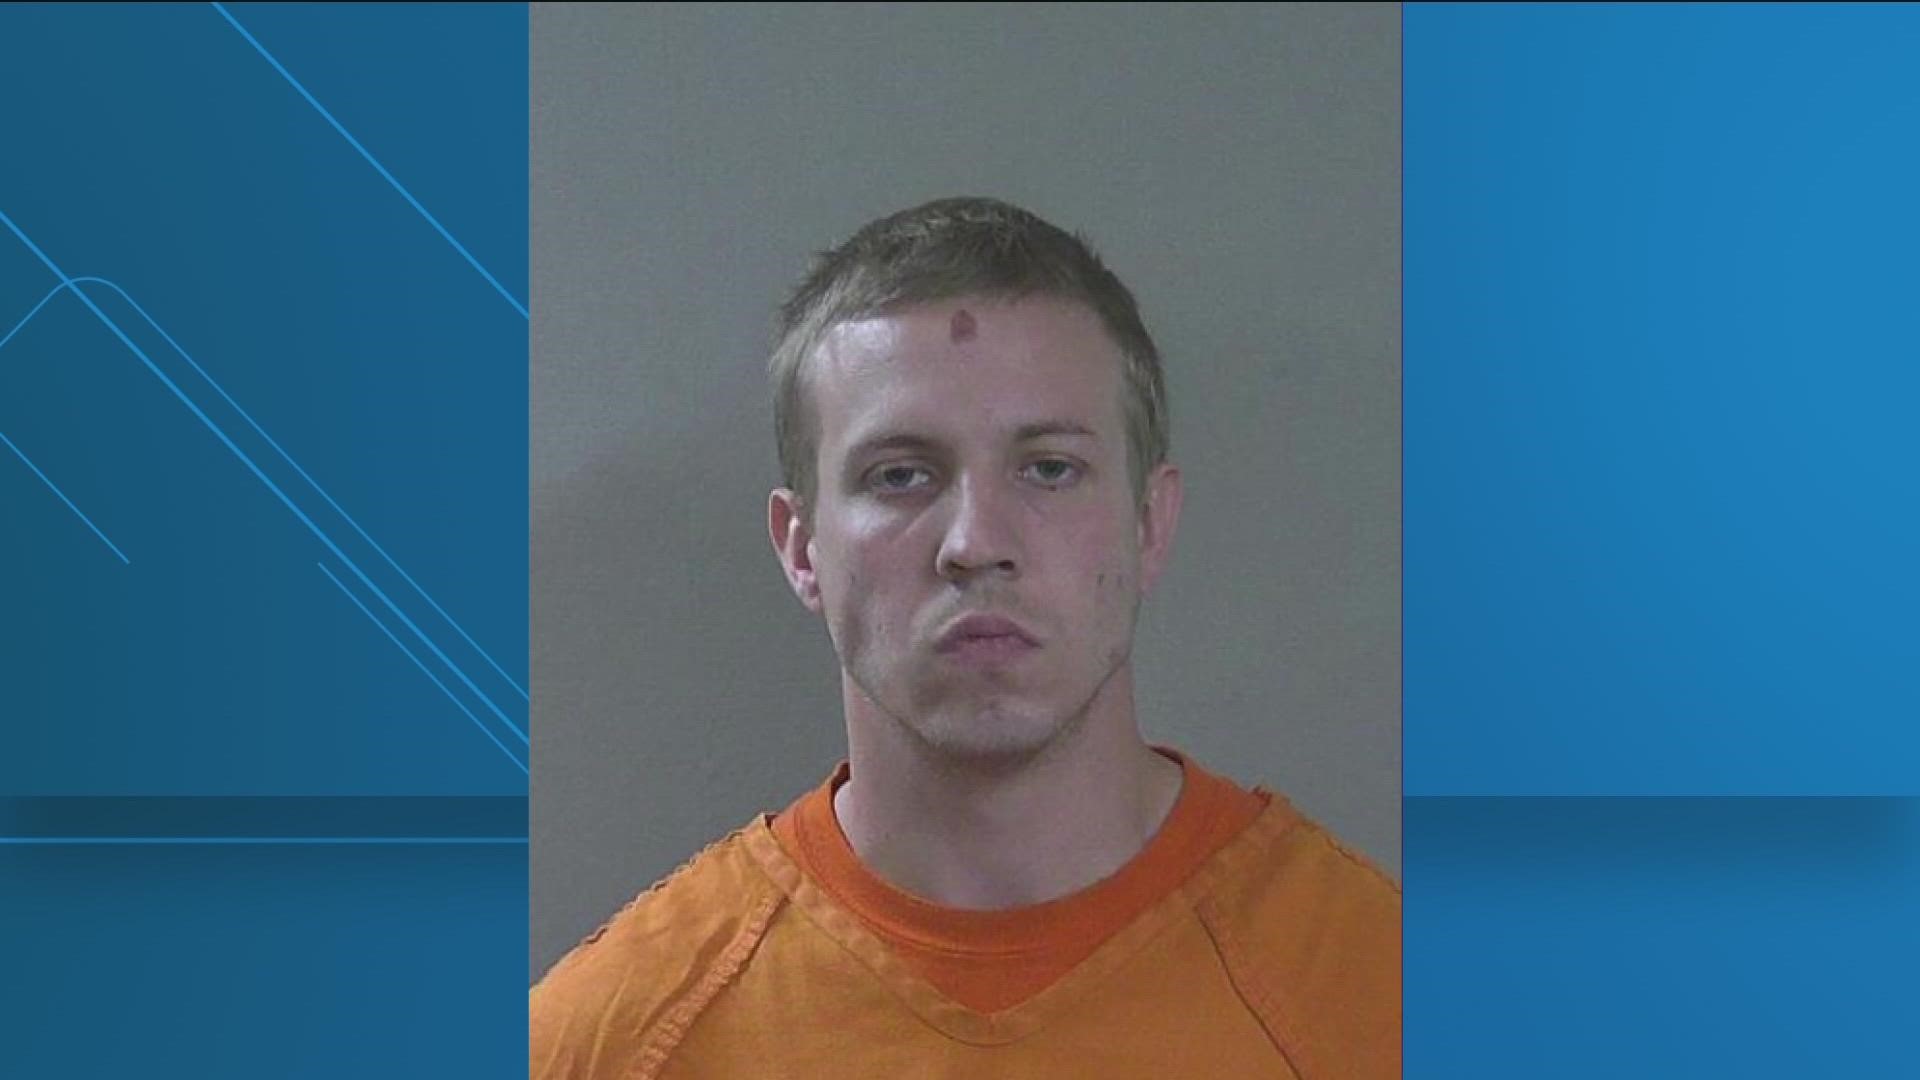 The Adams County Sheriff's Office says the Mehens told a deputy Hart was “okay to stay at the hotel, as long as he stopped going into other guests’ hotel rooms".